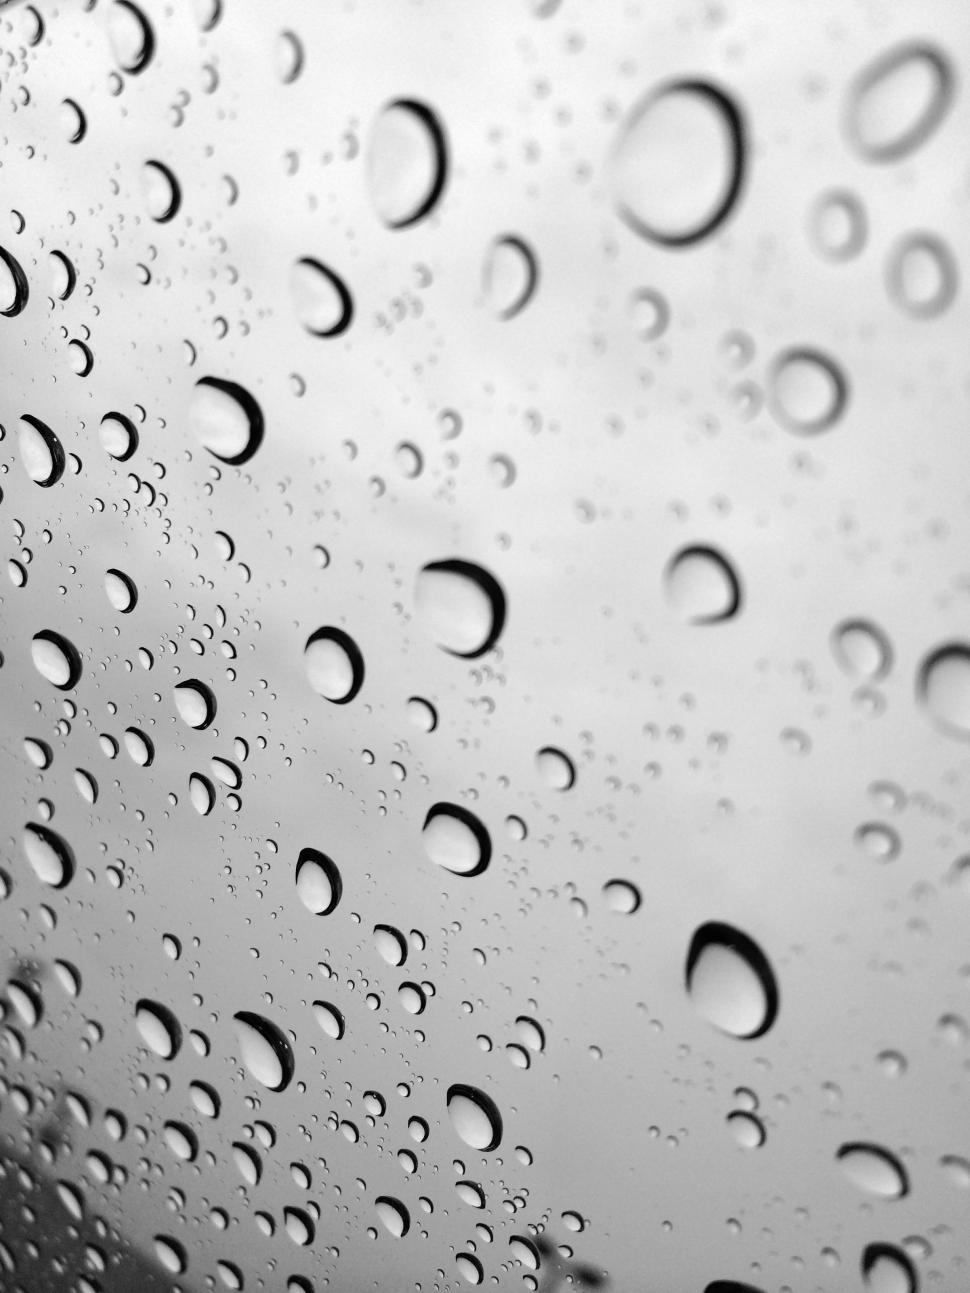 Free Image of Rain Drops on a Window With Sky Background 